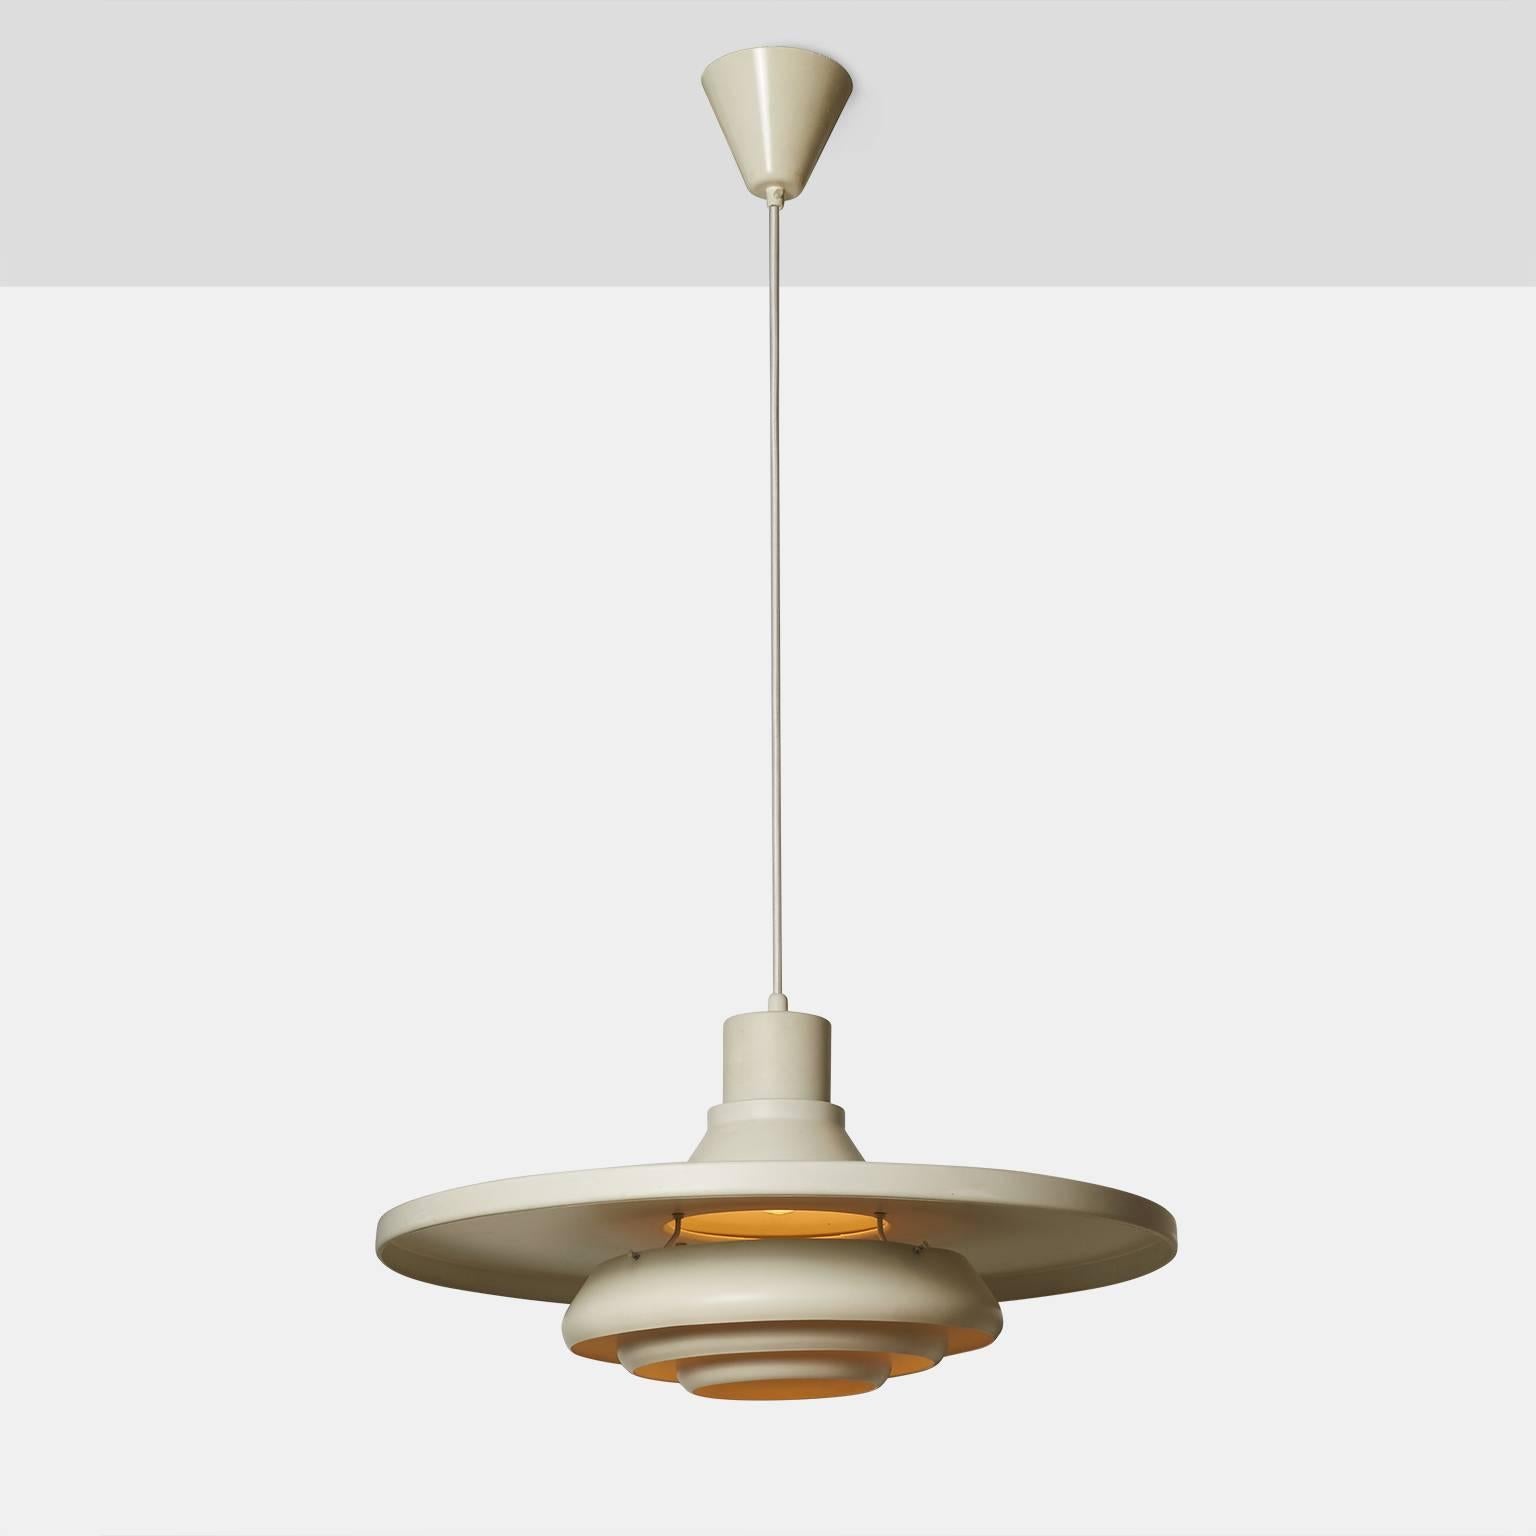 A very rare pendant by Alvar Aalto for Valaistustyö, Finland. The metal pendant has the original white lacquer finish and retains the mark Valaistustyö, circa 1954, Finland. The pendant has been rewired with a woven cloth cord.